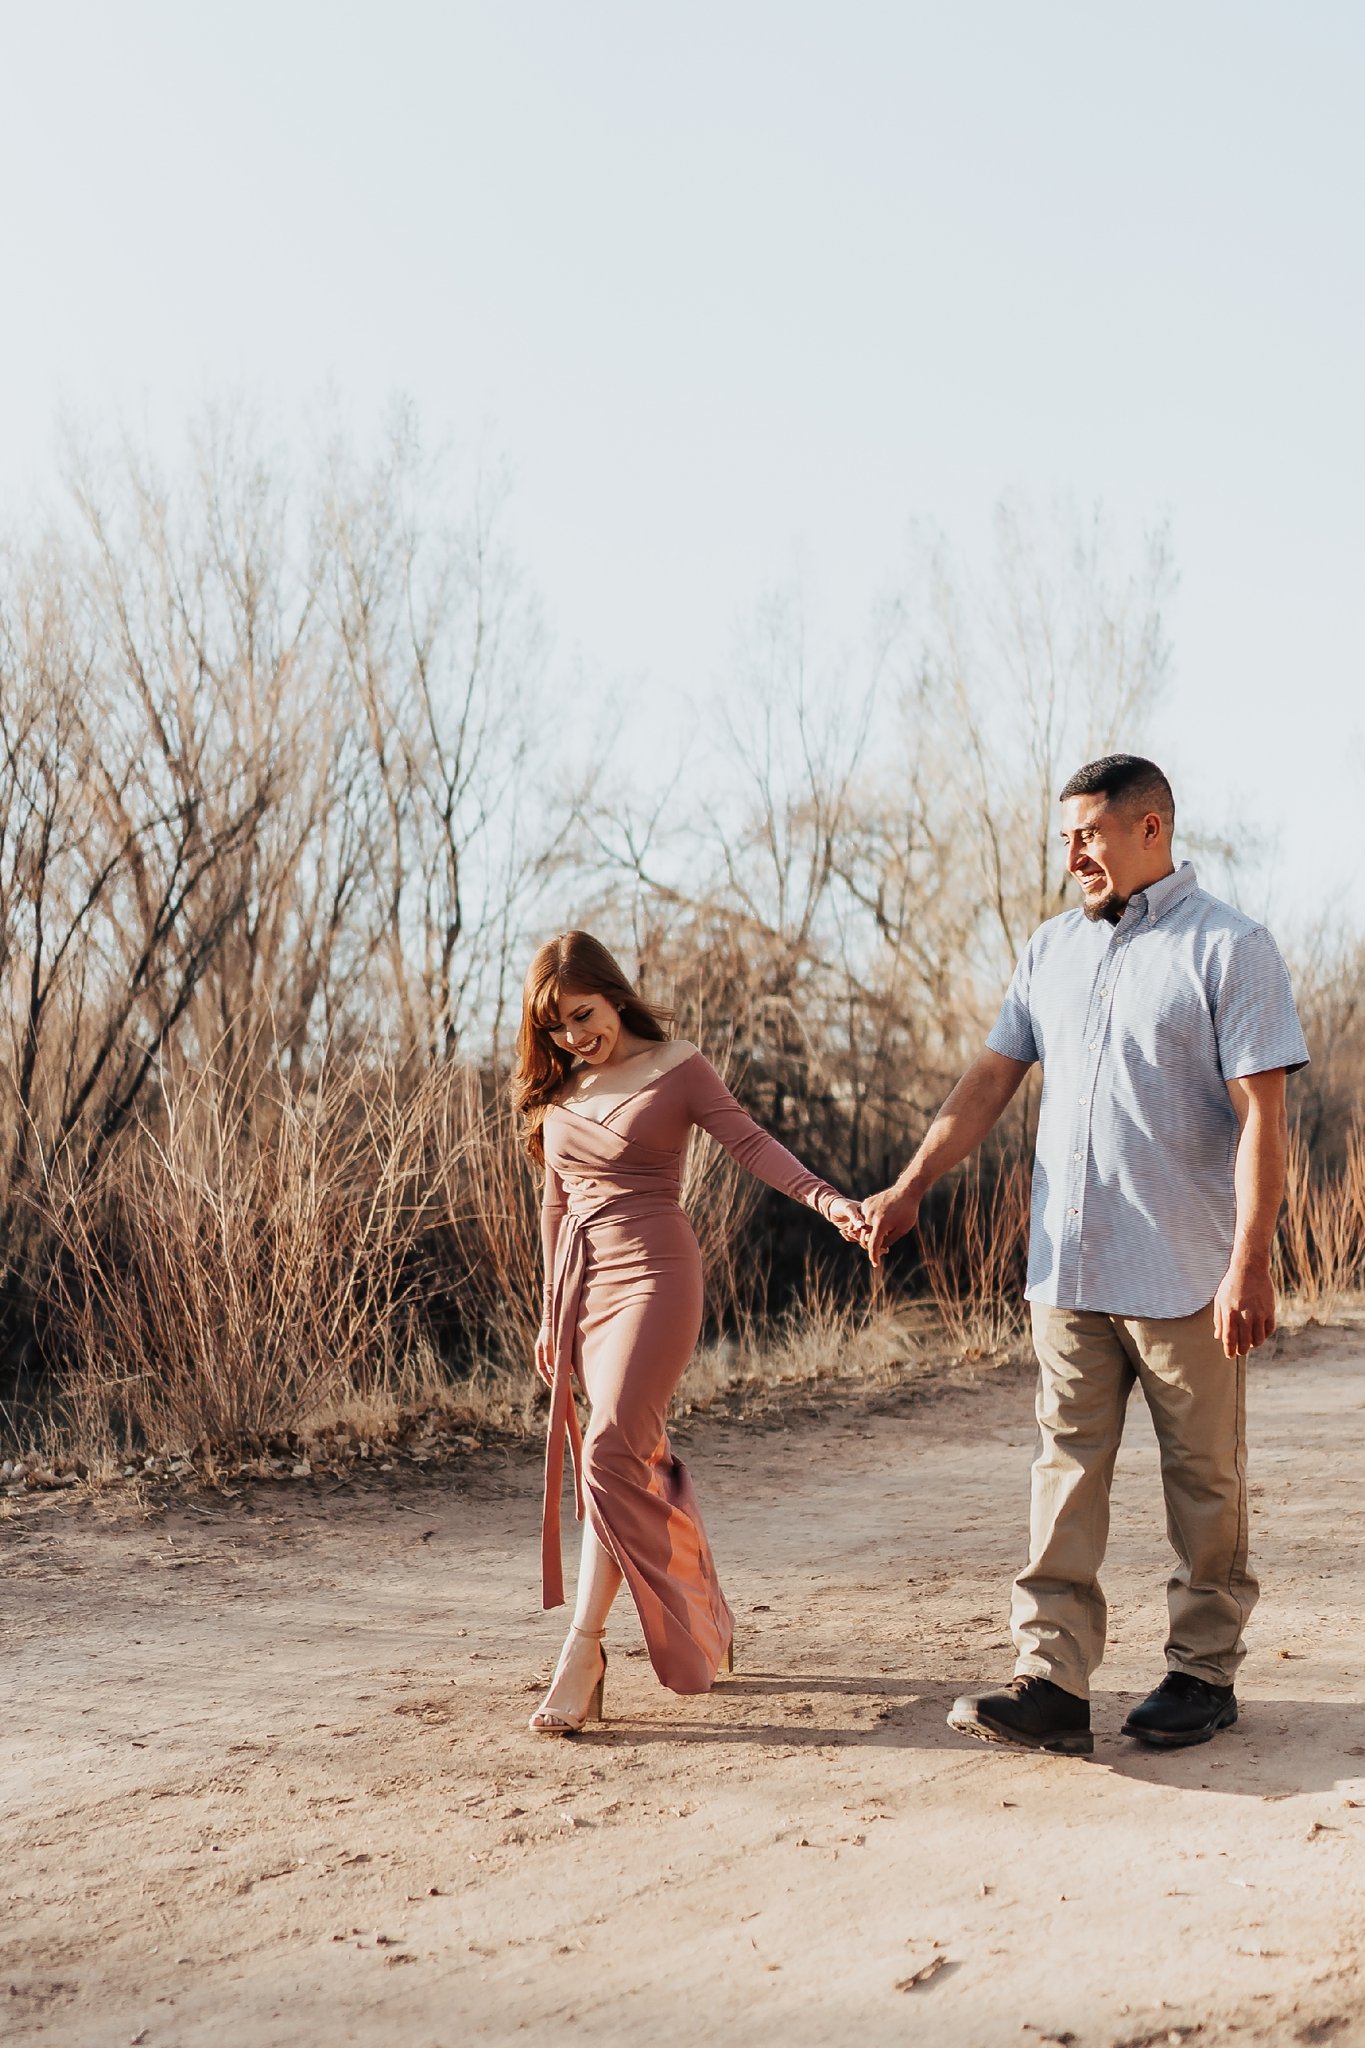 Steven + Ashley, a Dreamy New Mexico Engagement — Alicia Lucia Photography Albuquerque and Santa Fe New Mexico Wedding and Portrait Photographer image